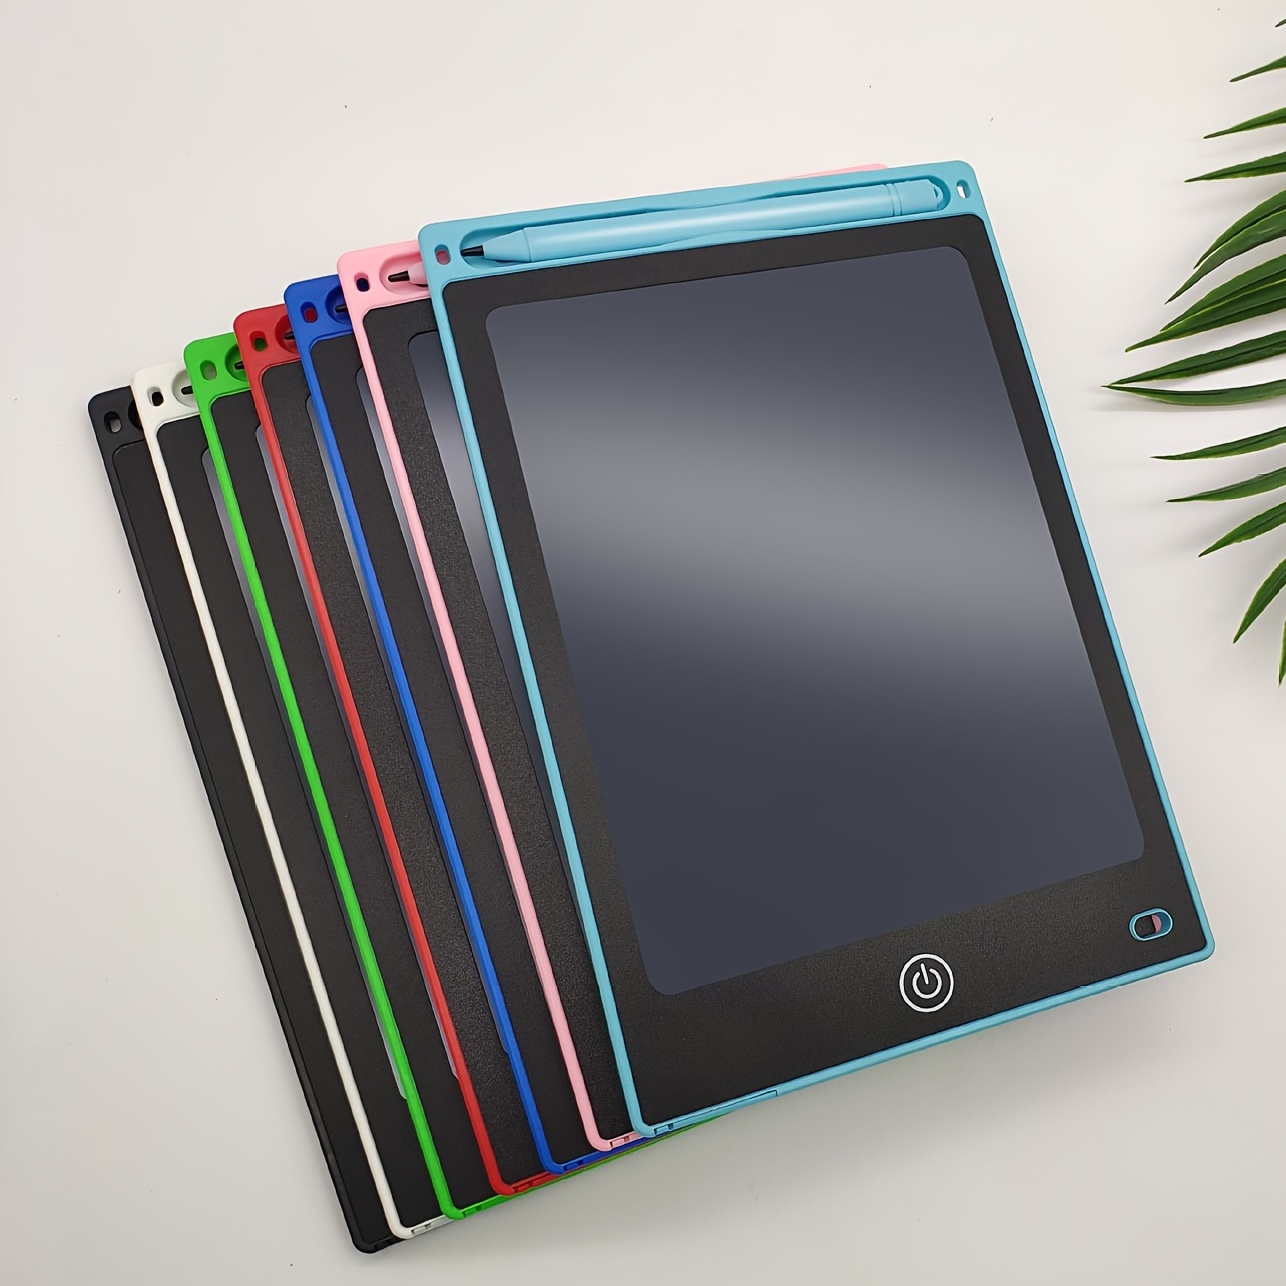 8 5inch 21 6cm lcd writing drawing tablet for kids educational birthday gift for kids christmas and halloween gift